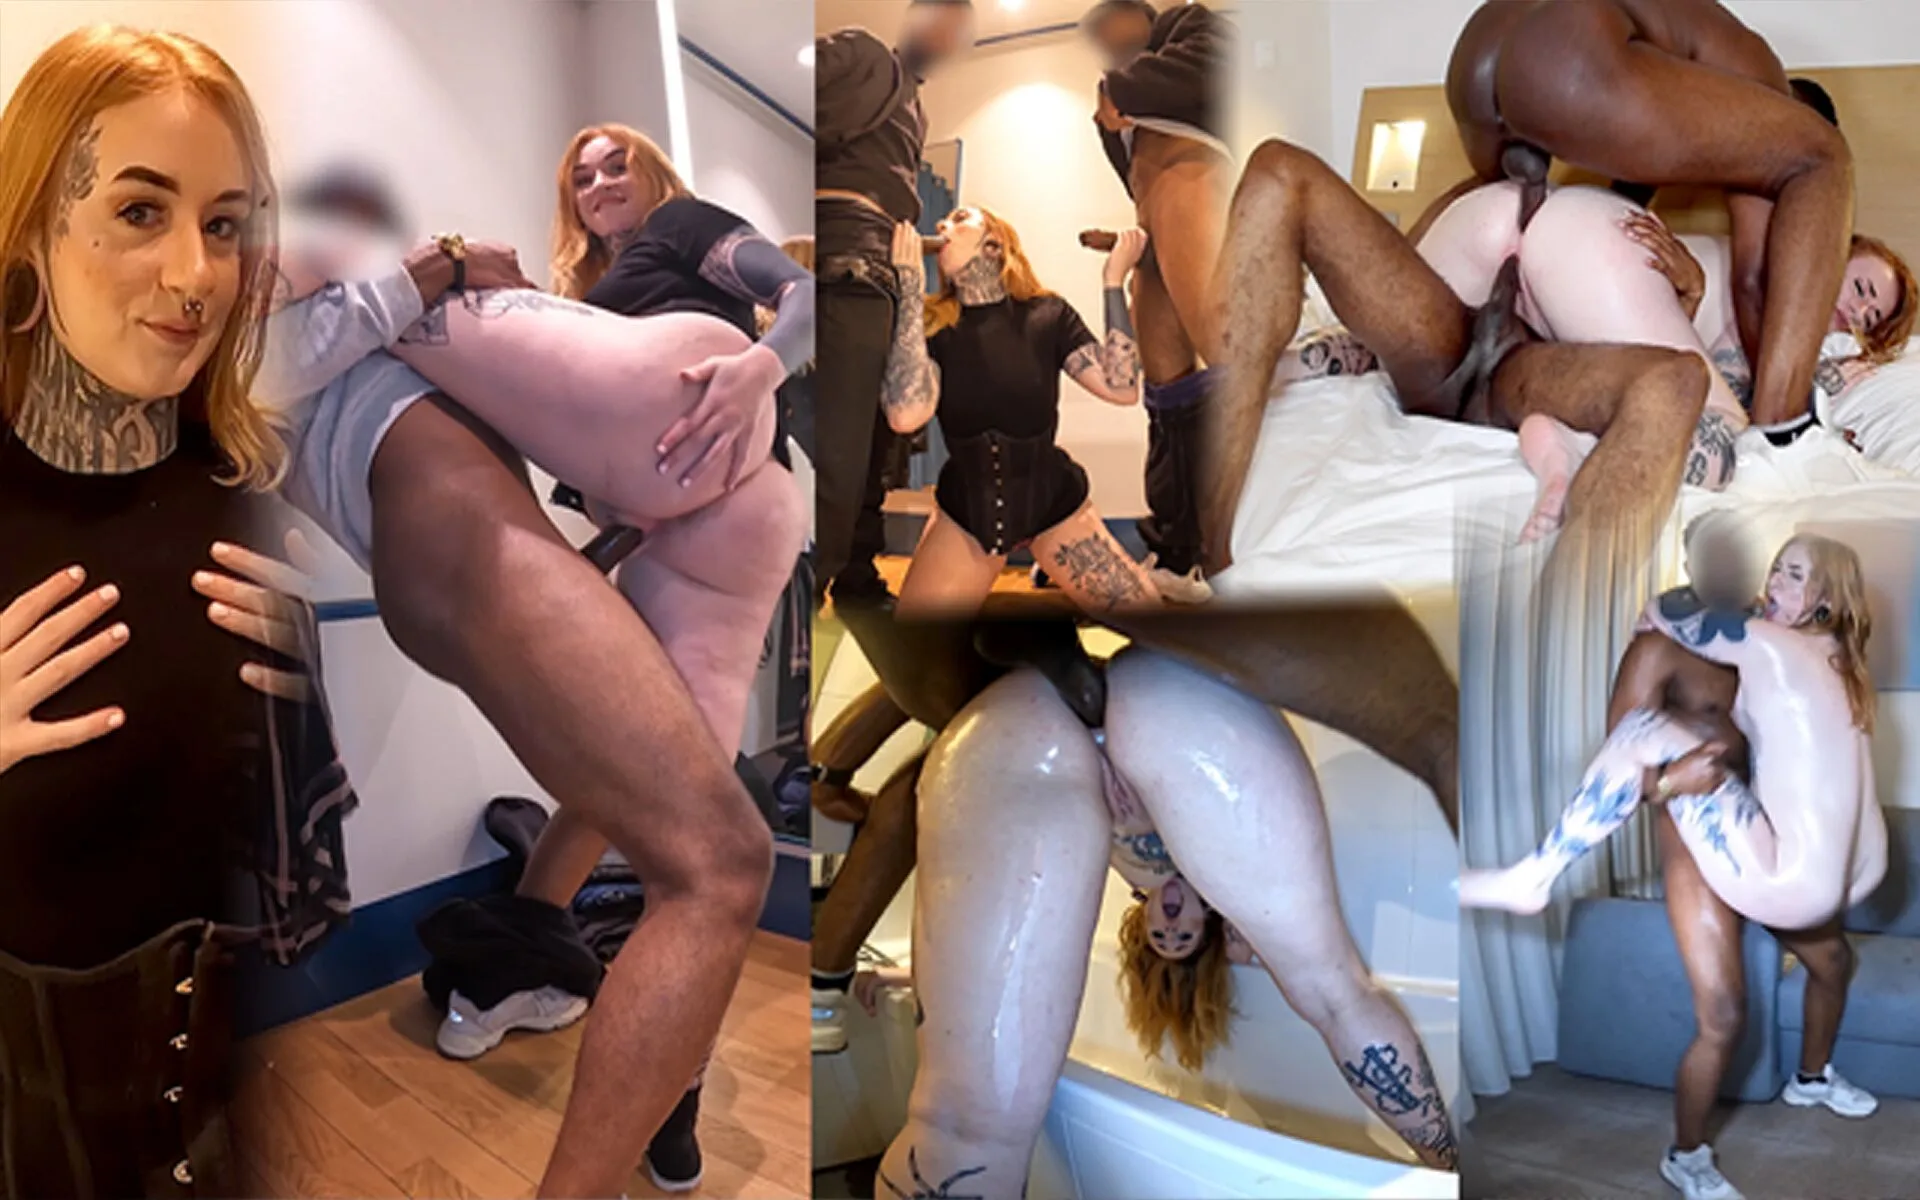 Big Ass British Student Gets Anal Fucked Hard in Fitting Room and Hotel Corridor by 2 Strangers!!! by Reels plans Faphouse image